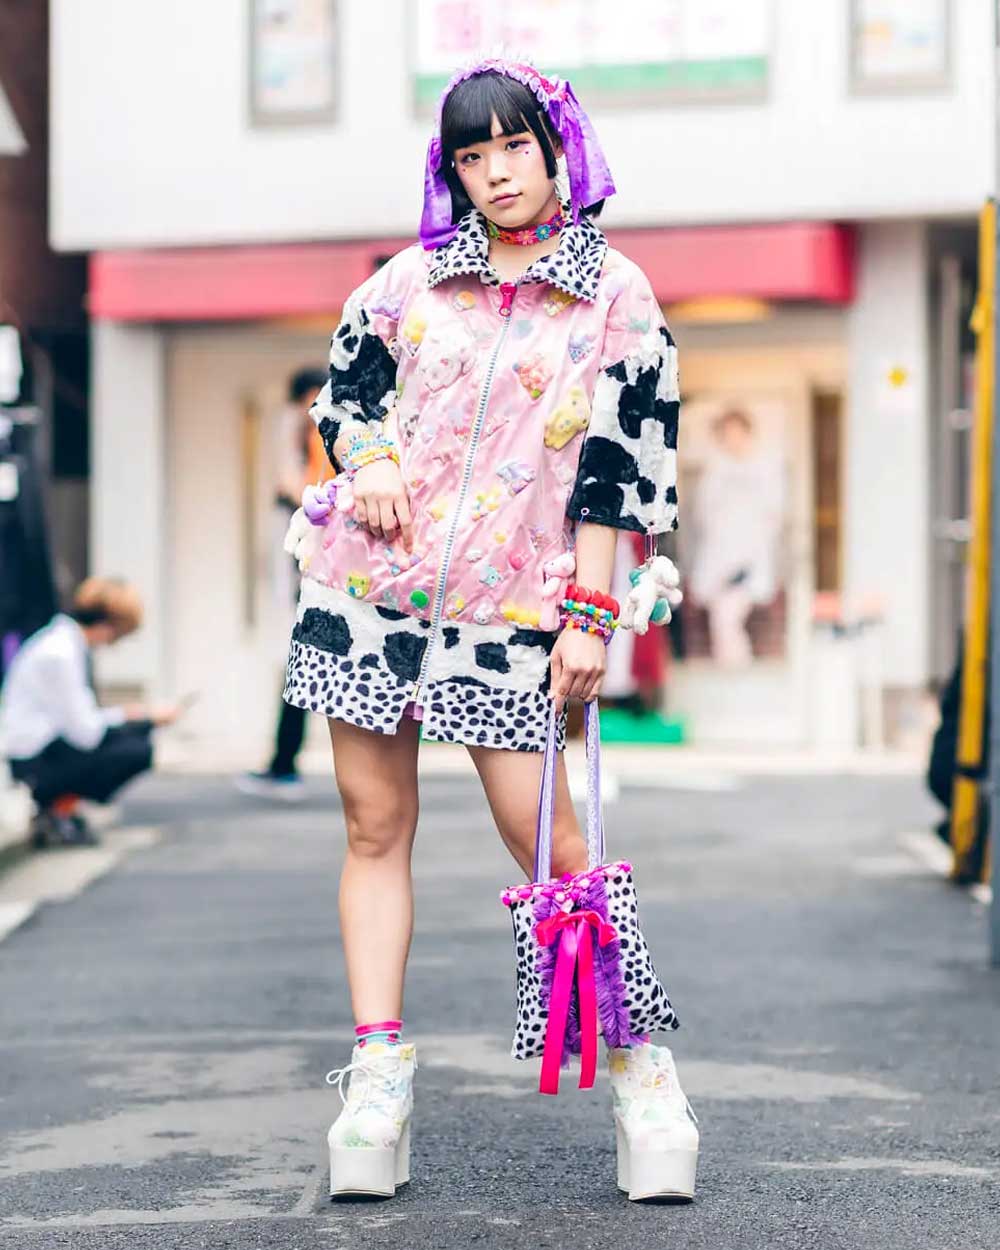 29 Most Popular Japanese Fashion Trends of 2022